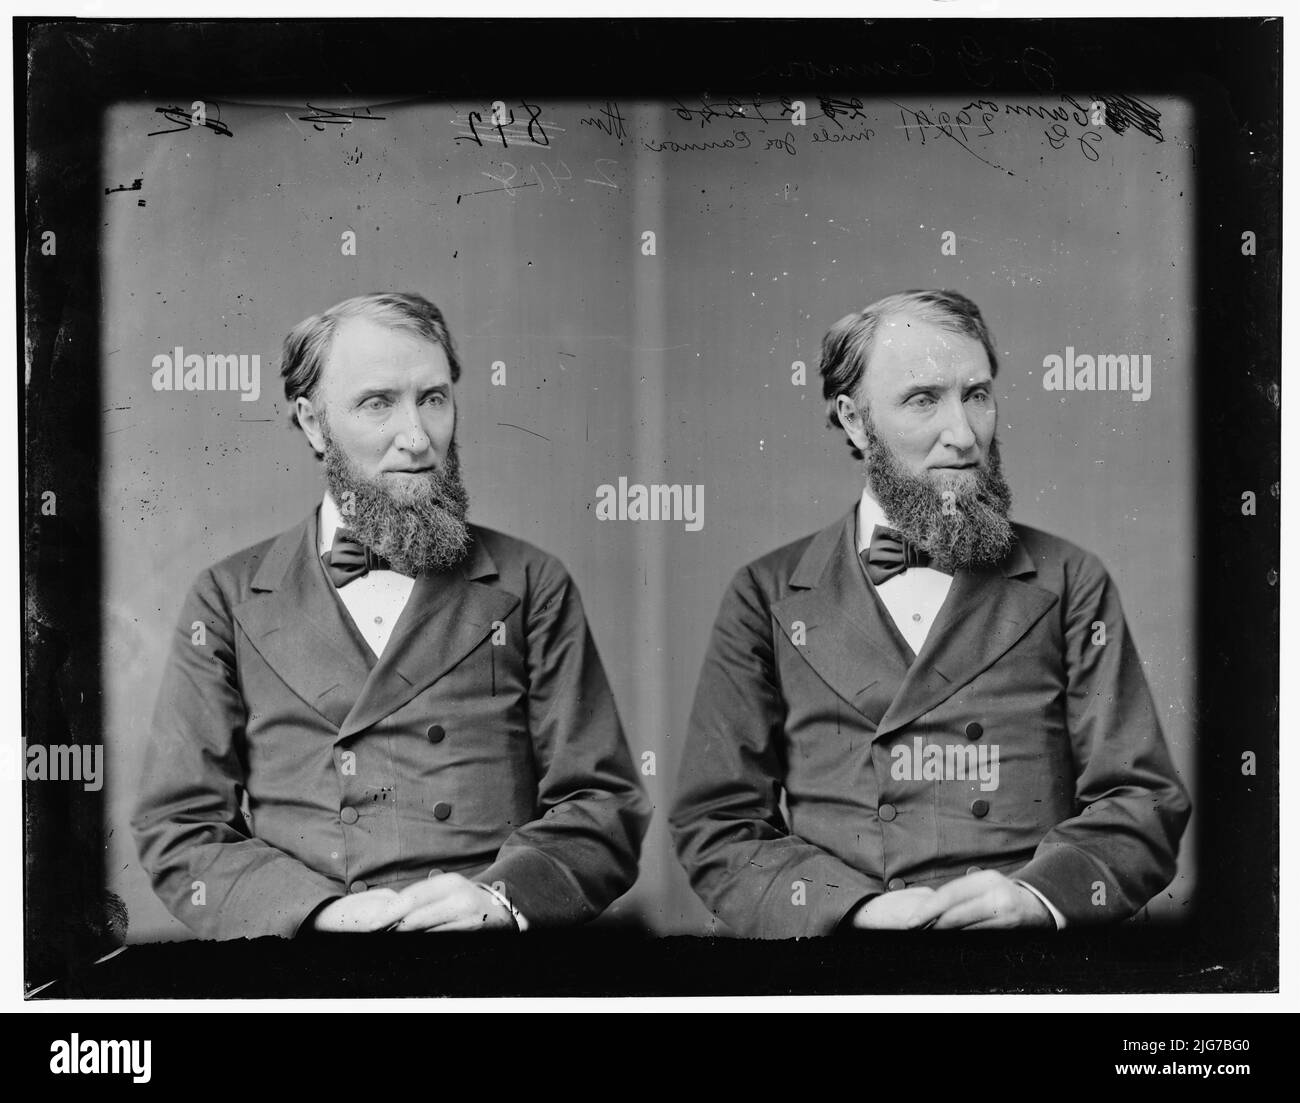 Joe Cannon of Illinois, 1876. Cannon, Hon. Joe. Neg. made 1876. M.C. [Member of Congress?], Ill., between 1865 and 1880. [Politician, Speaker of the US House of Representatives]. Stock Photo